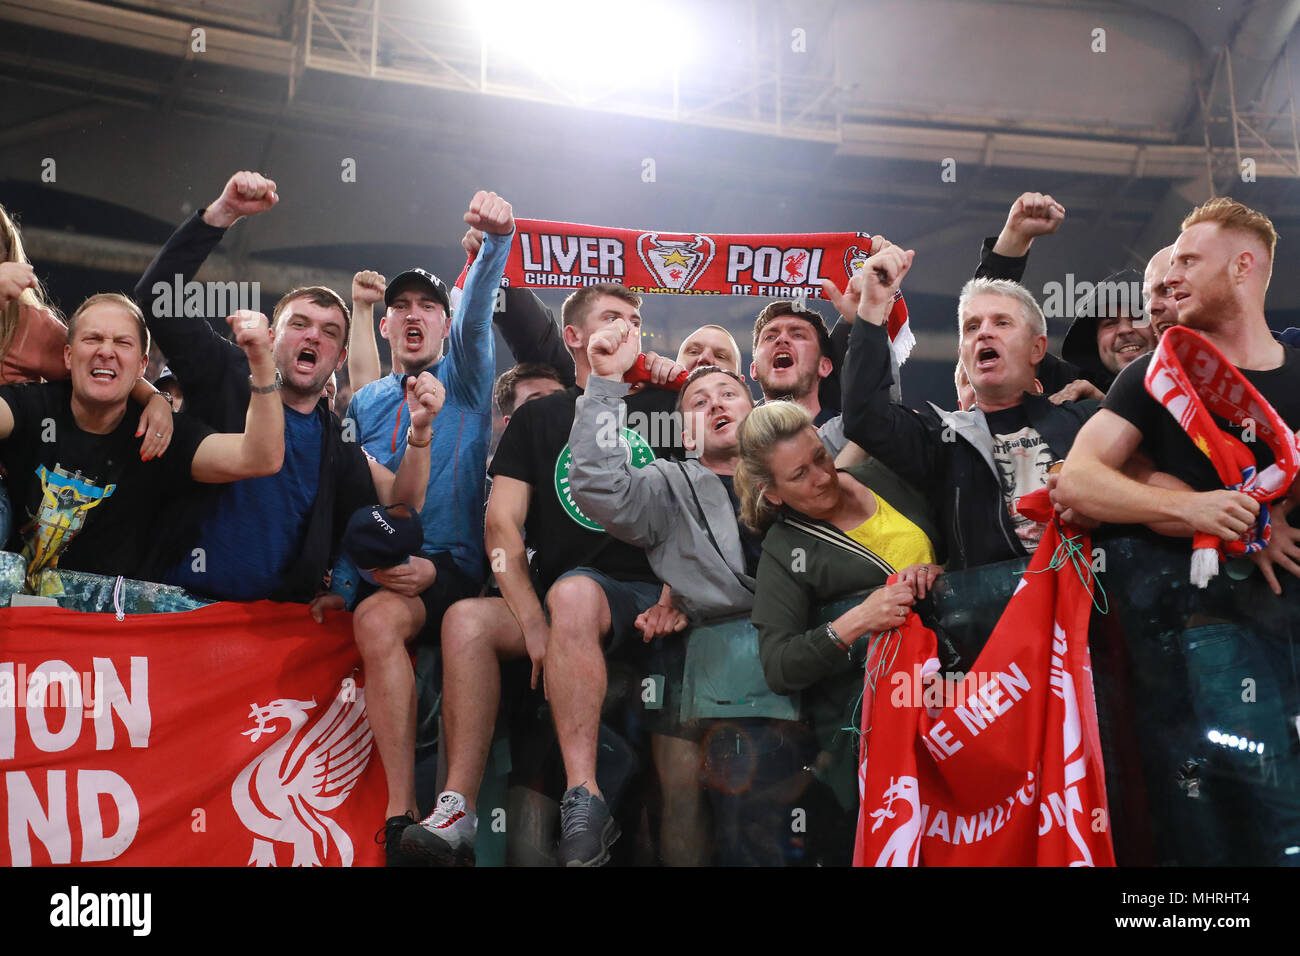 Uefa Champions League Finale High Resolution Stock Photography and Images -  Alamy